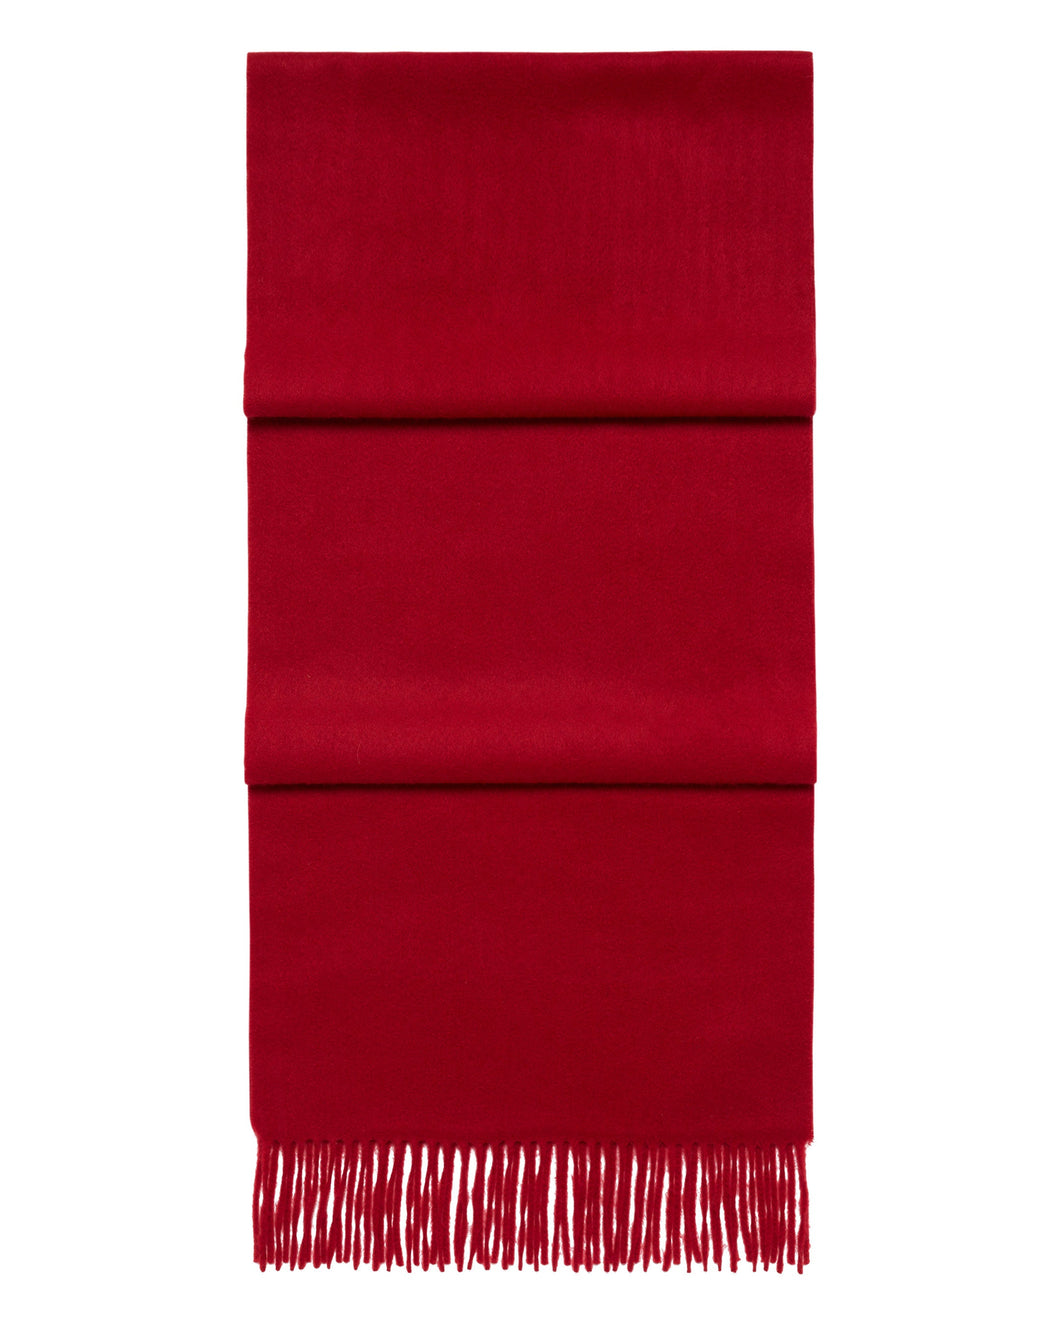 N.Peal Unisex Large Woven Cashmere Scarf Ruby Red